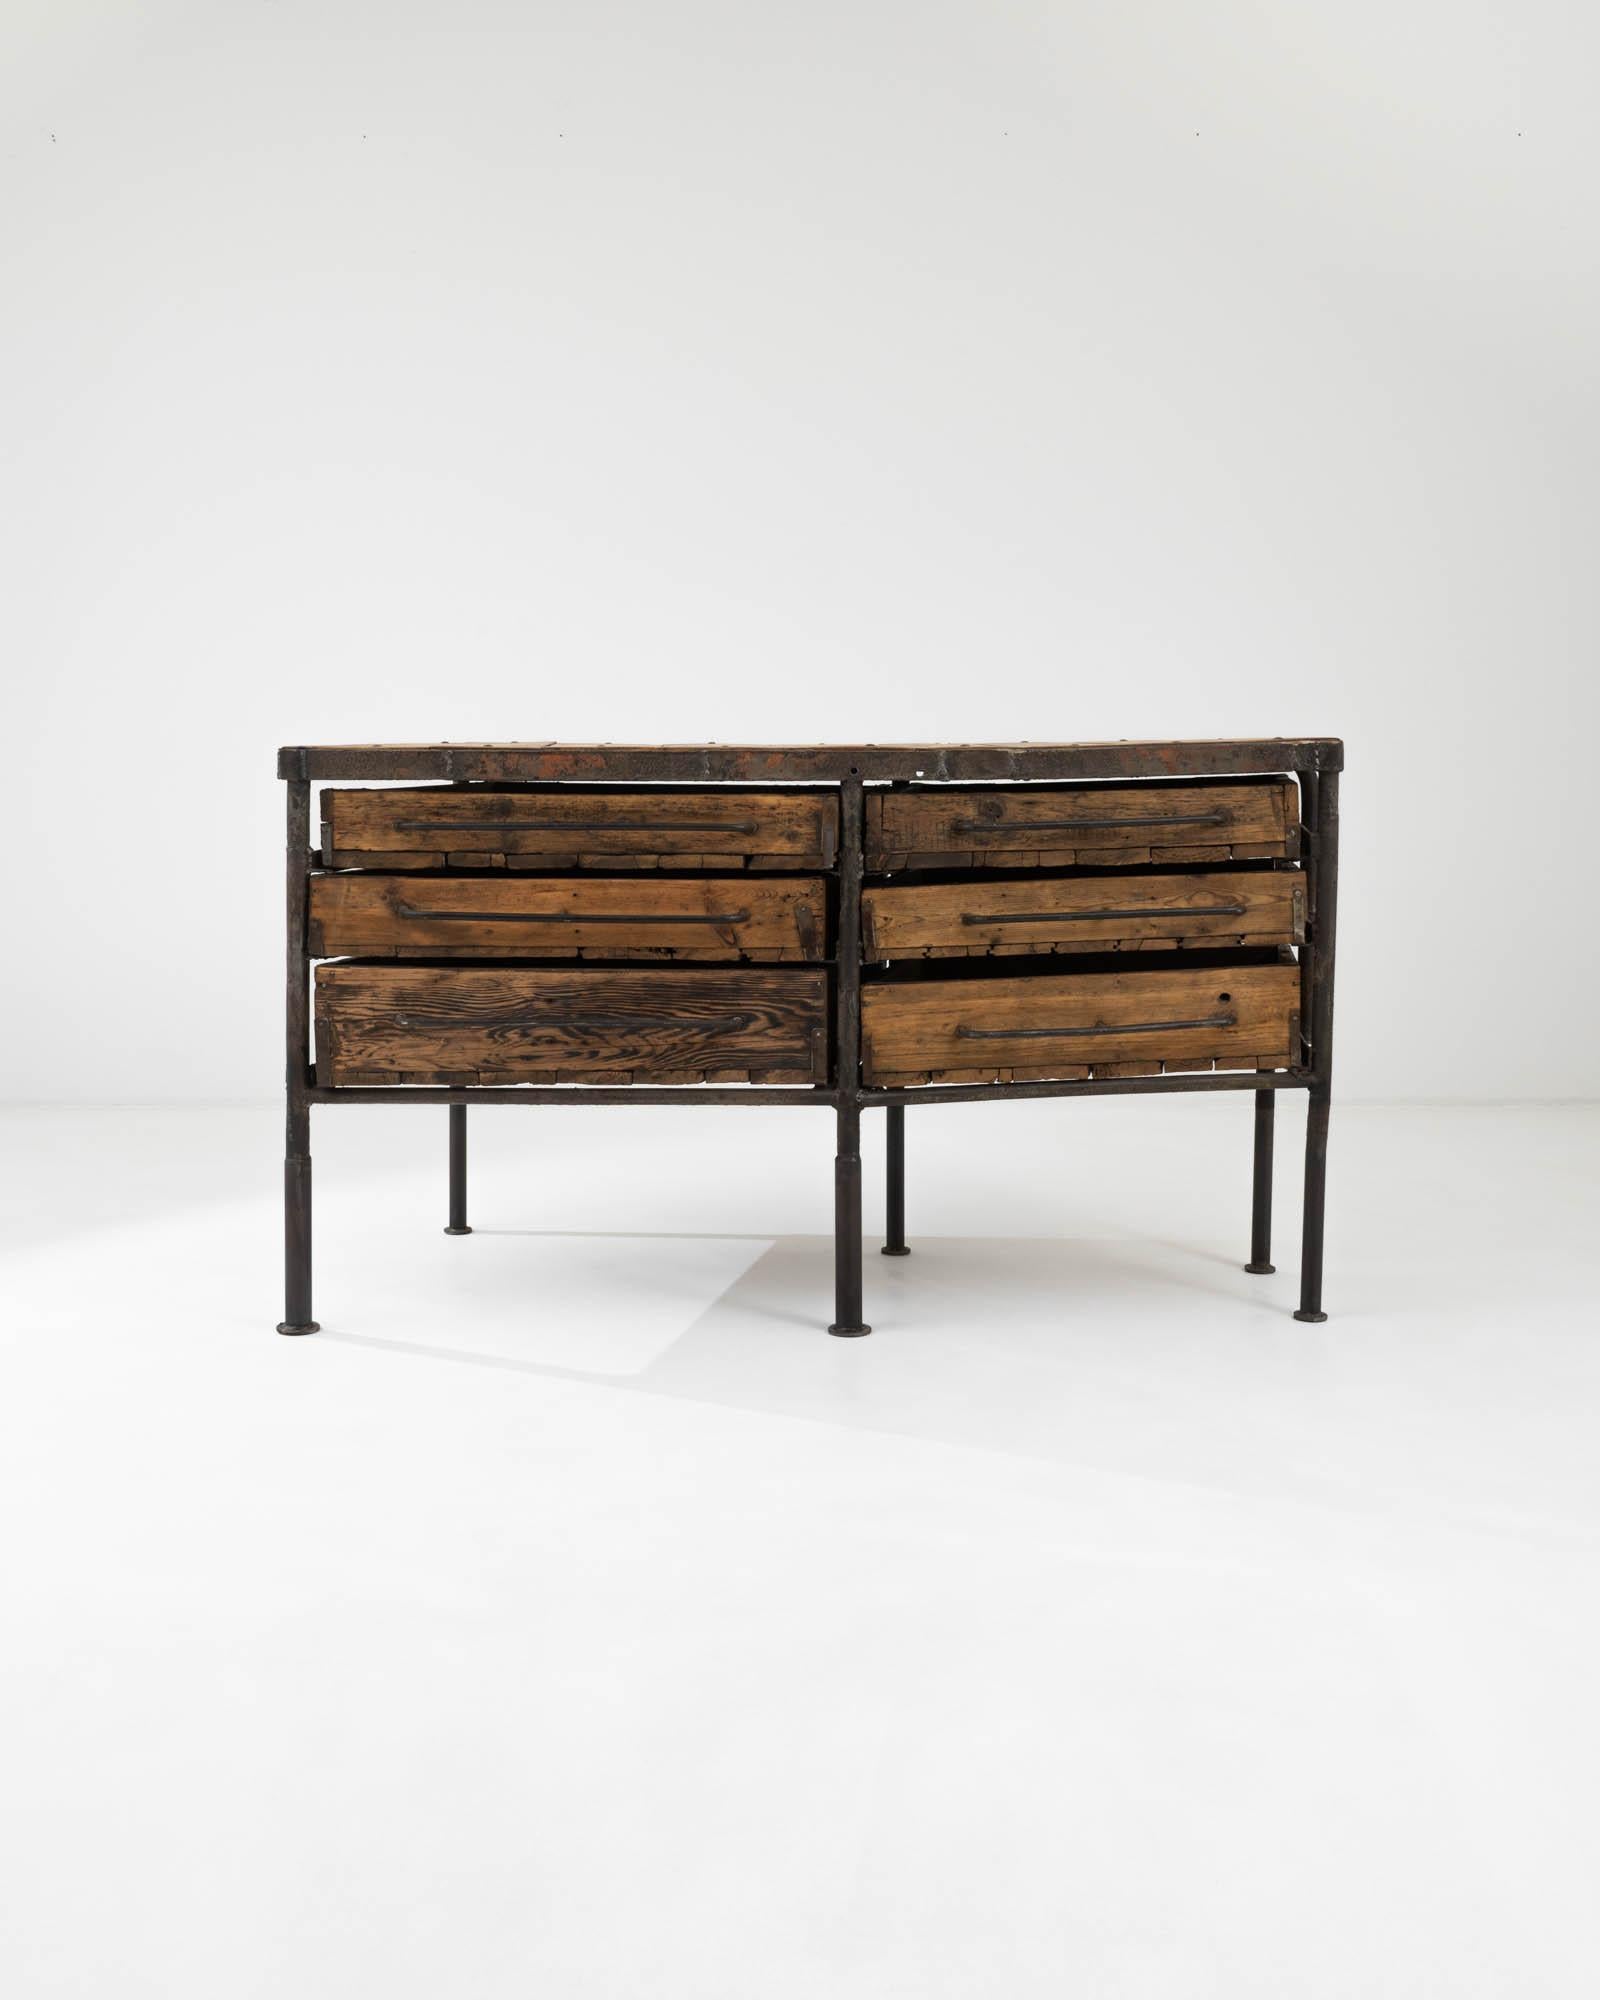 A wooden and metal work table created in 20th century France. A rag tag collection of patinated wooden drawers, secured by banded strips of iron line the sturdy industrial frame. Weathered wood and exposed welded metal joinery exudes this work